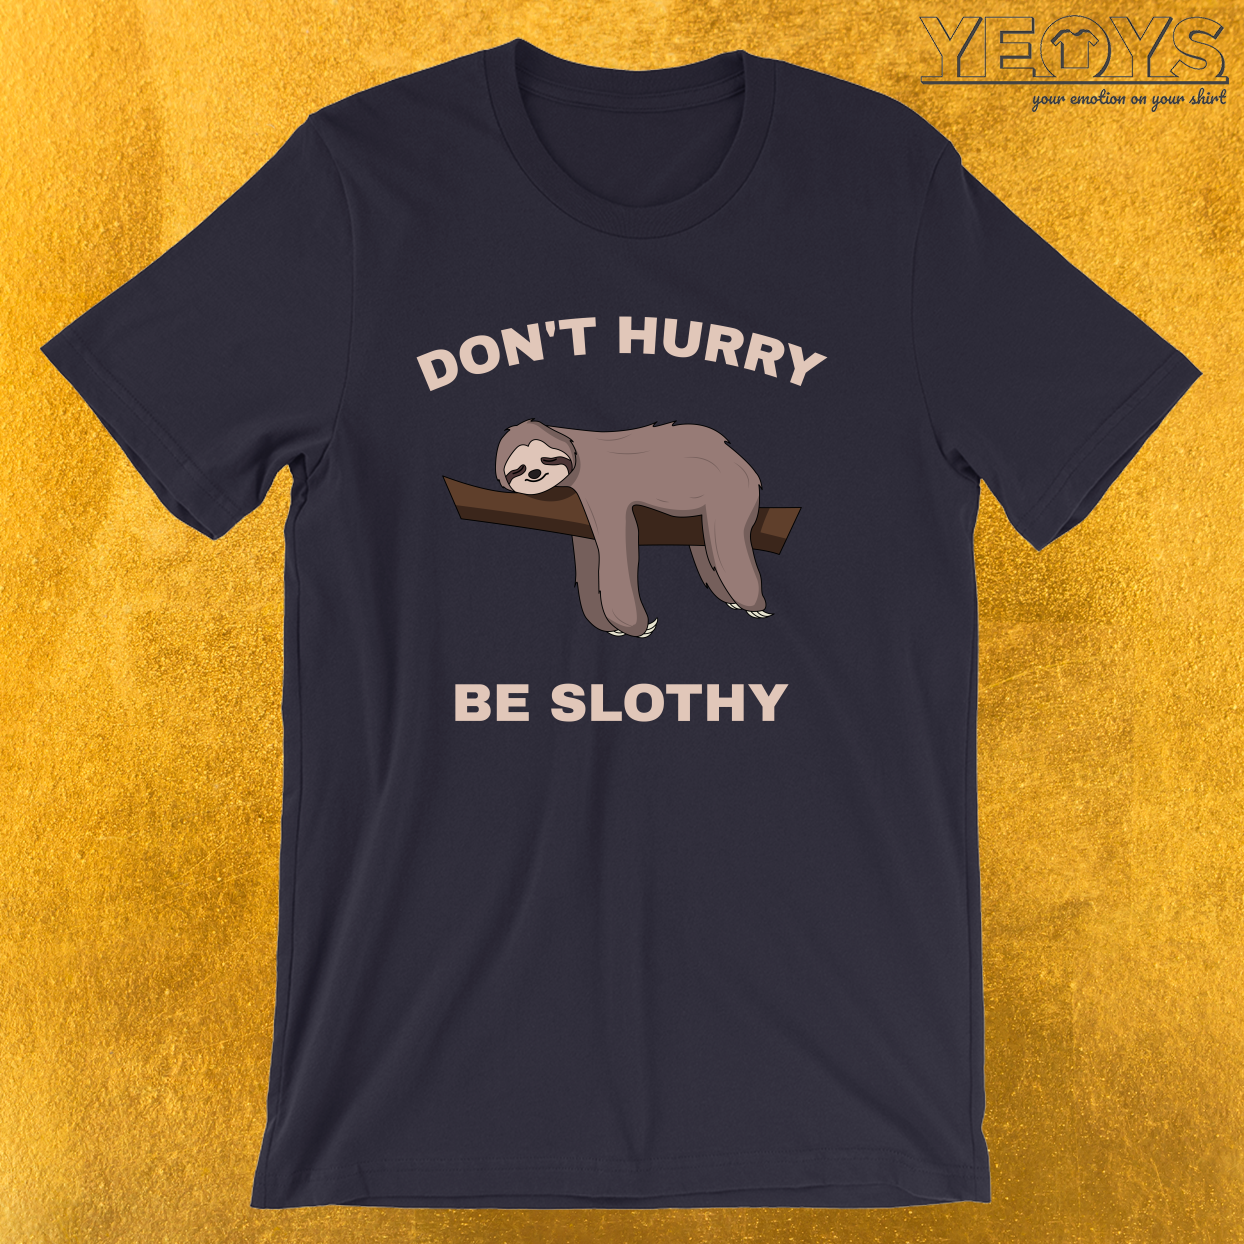 Don’t Hurry Be Slothy – Don’t Hurry Be Happy Sloth Tee